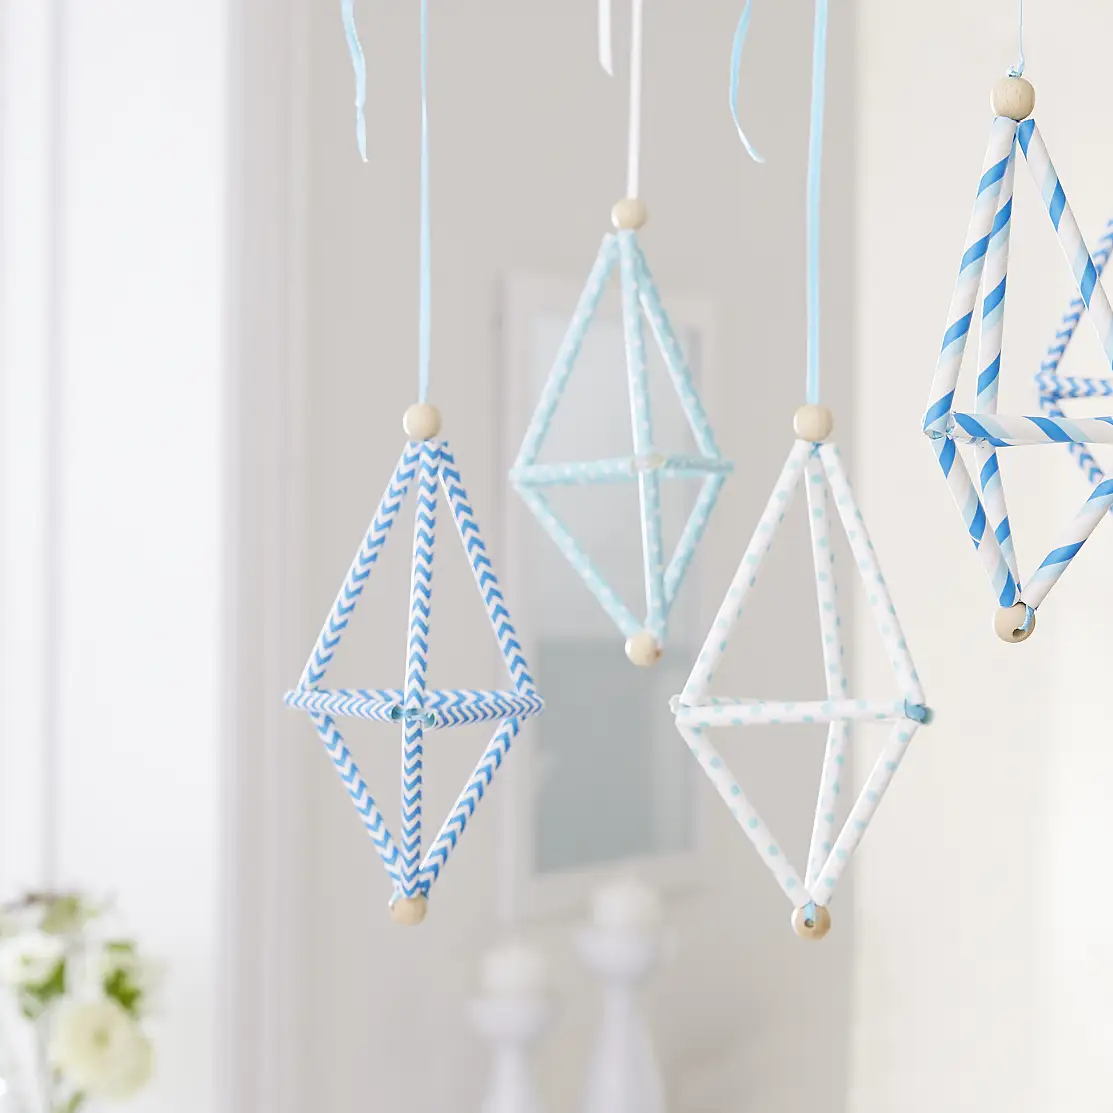 Home decor for baby rooms: The geometric mobile made from straws is fixed with the removable adhesive hooks Powerstrips® Transparent DECO Hook LARGE. Perfect for decorating ideas!